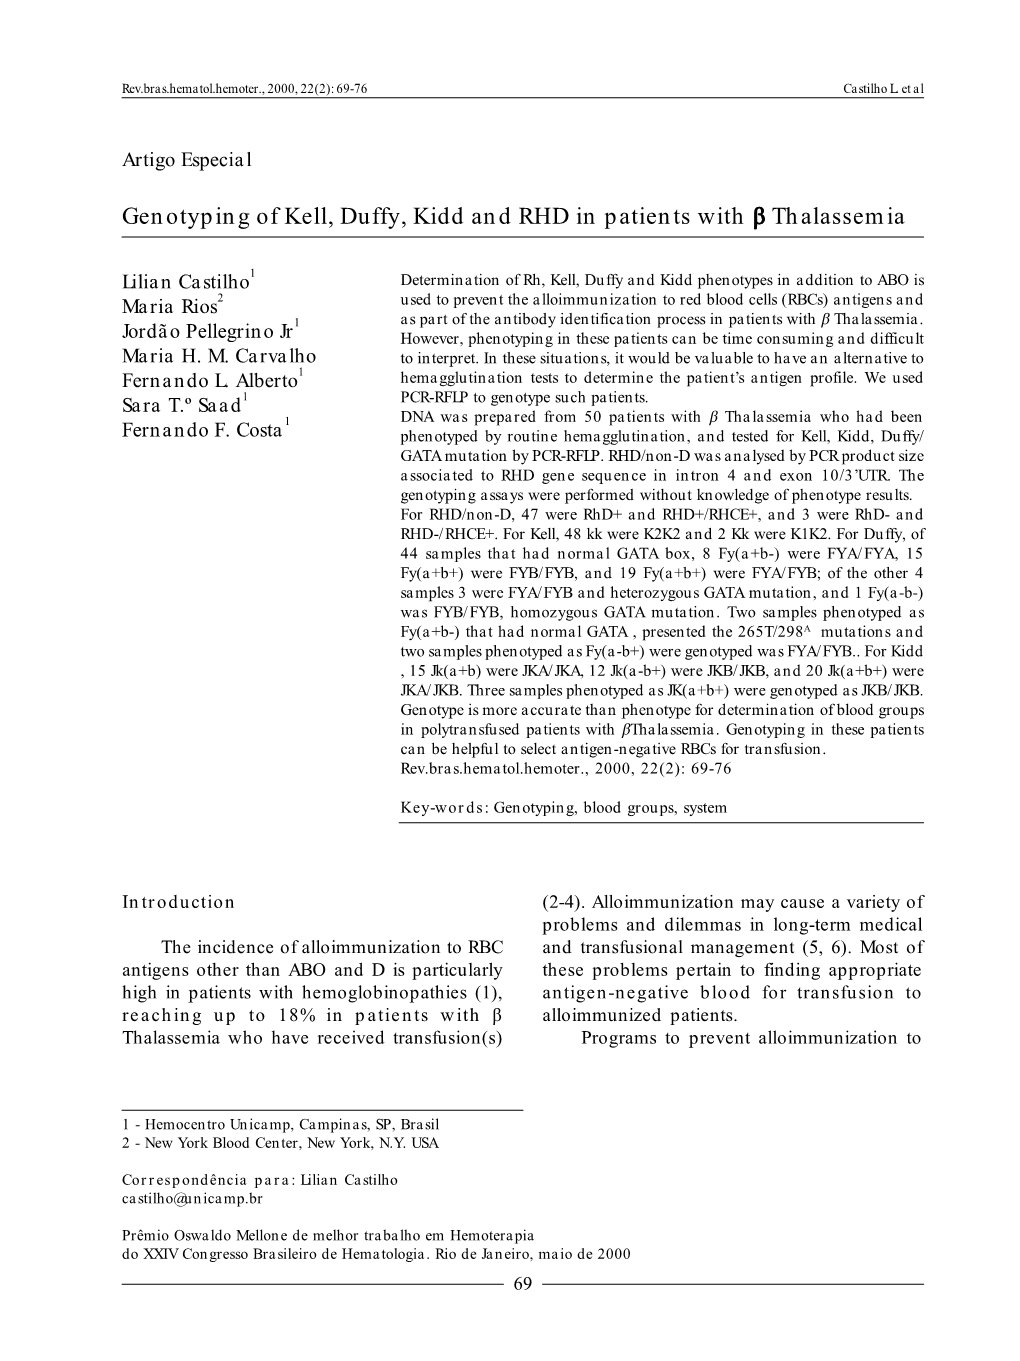 Genotyping of Kell, Duffy, Kidd and RHD in Patients with Β Thalassemia